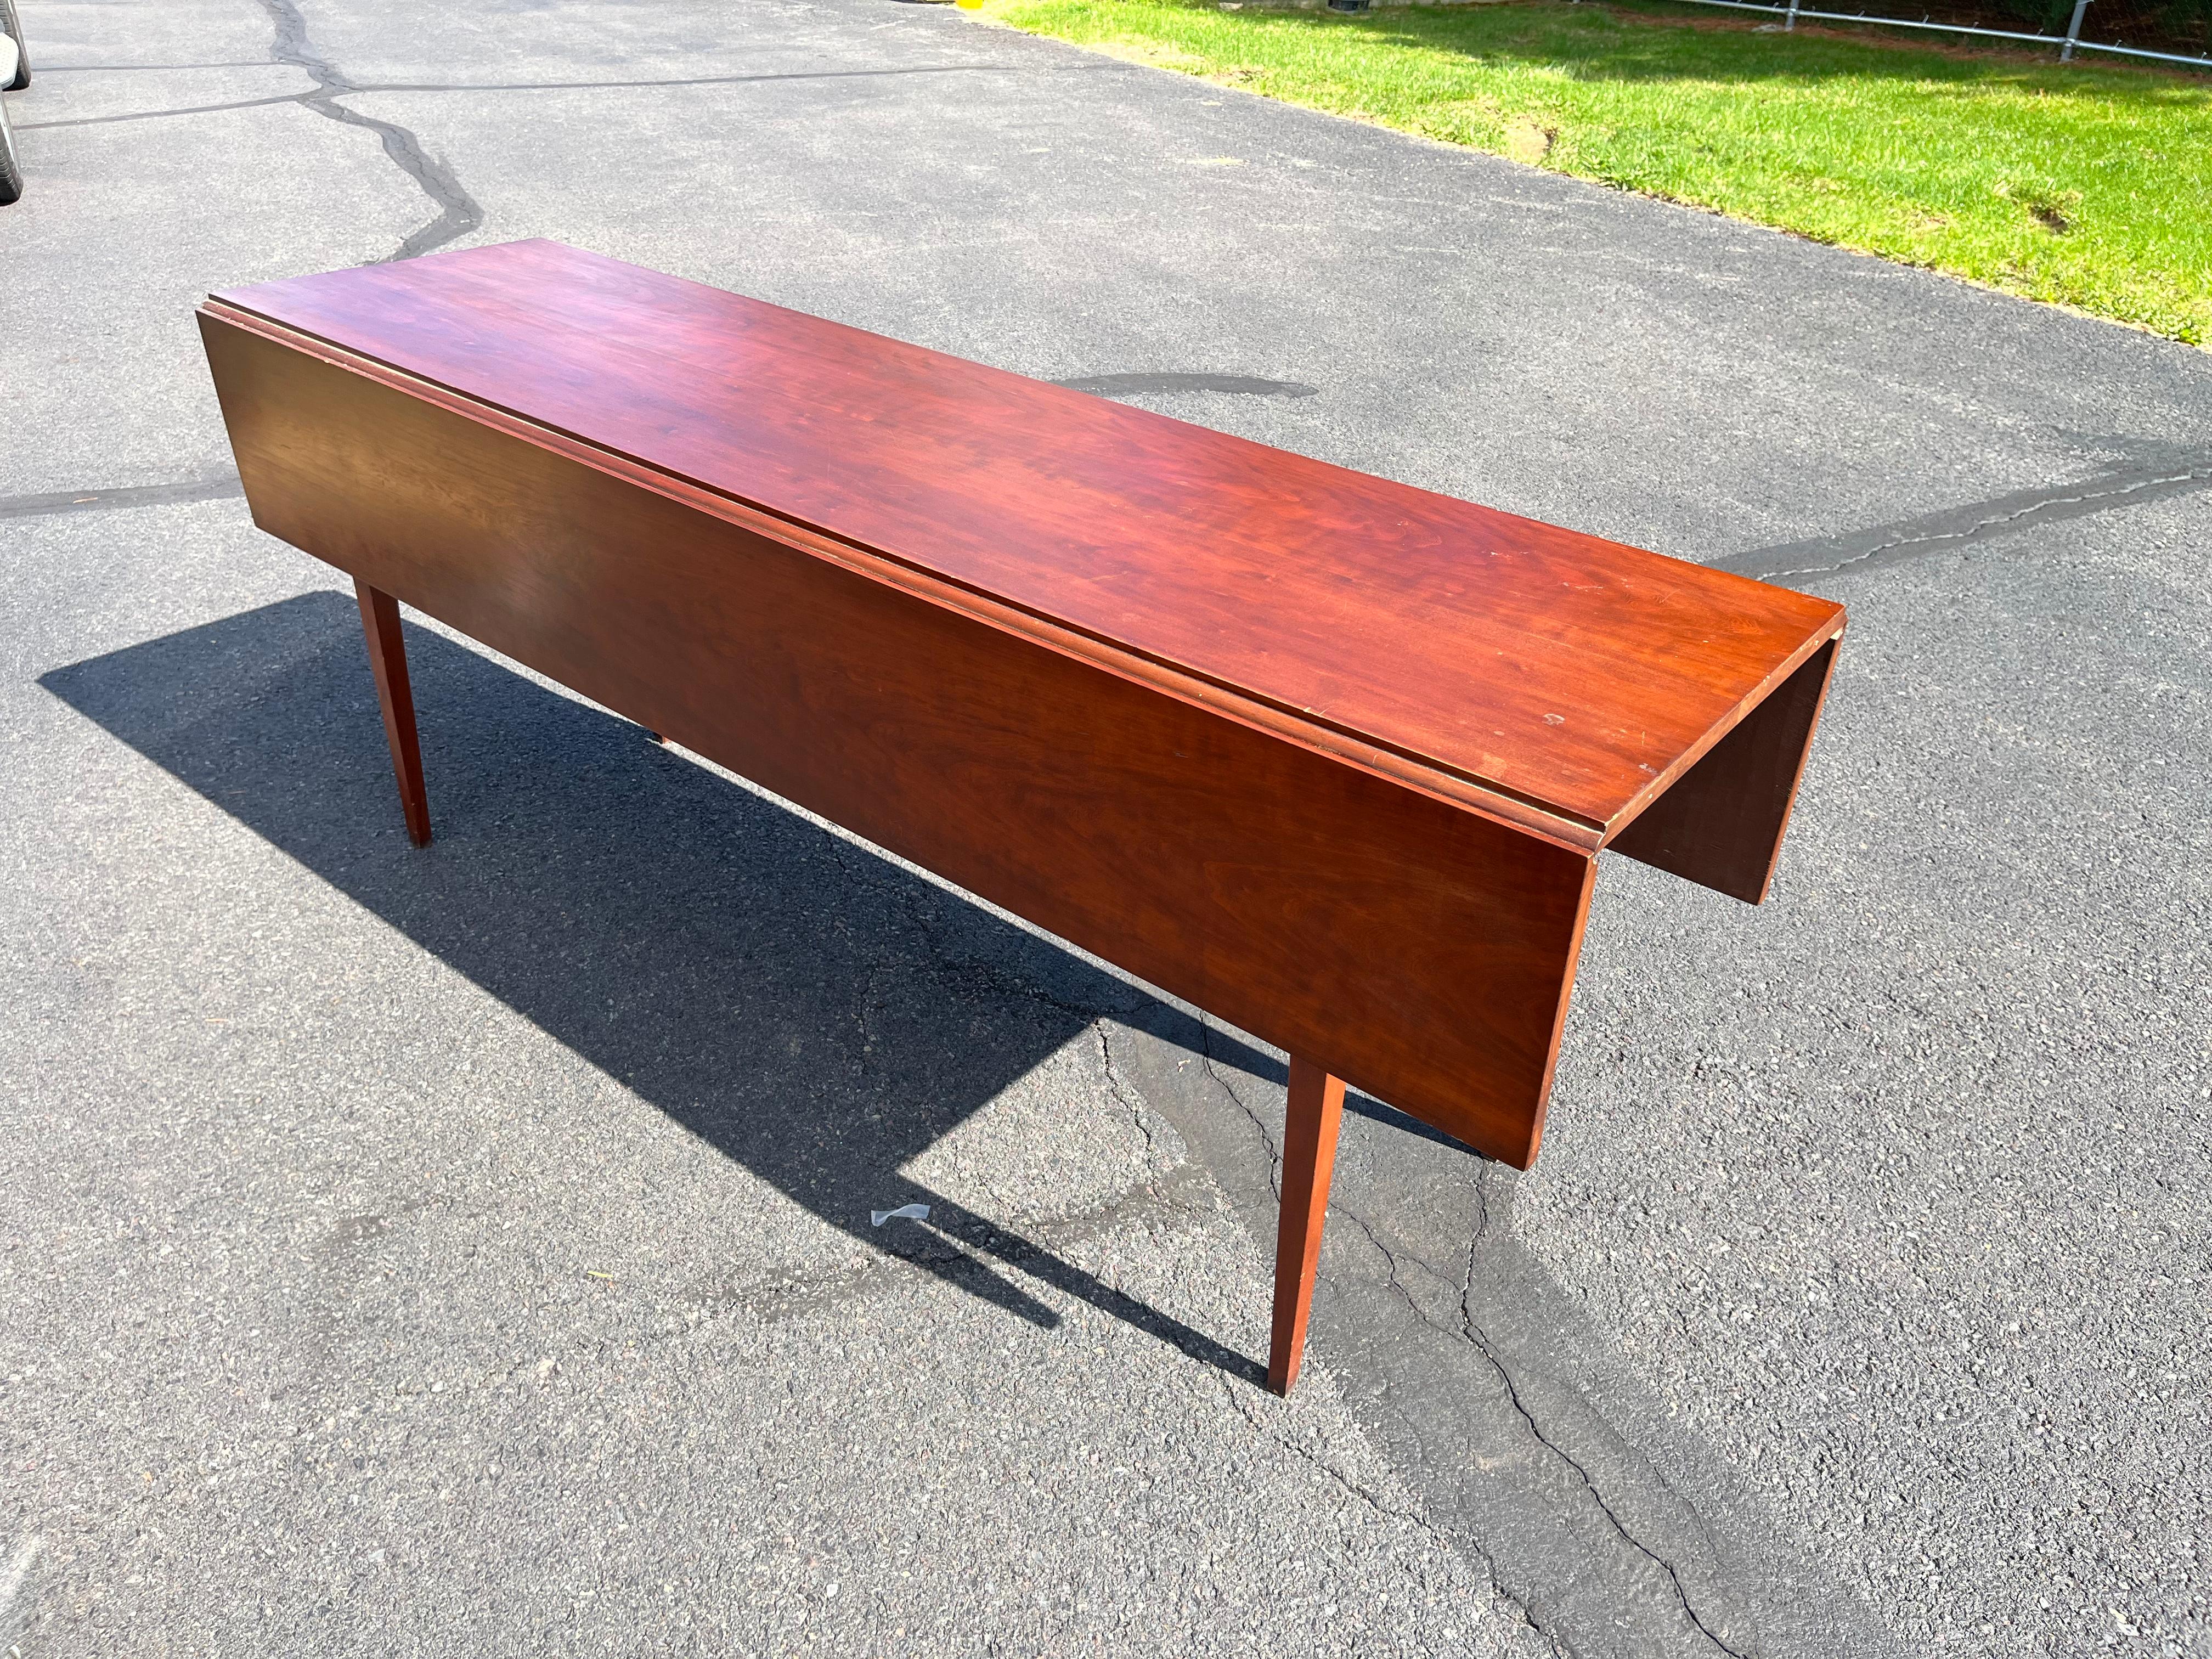 A wonderful cherrywood drop-leaf farm table in the Shaker manner by Eldred Wheeler, with hand-planed too and pegged construction. The table has a stamp and a paper label on the underside. Easily seats 8-10 people.